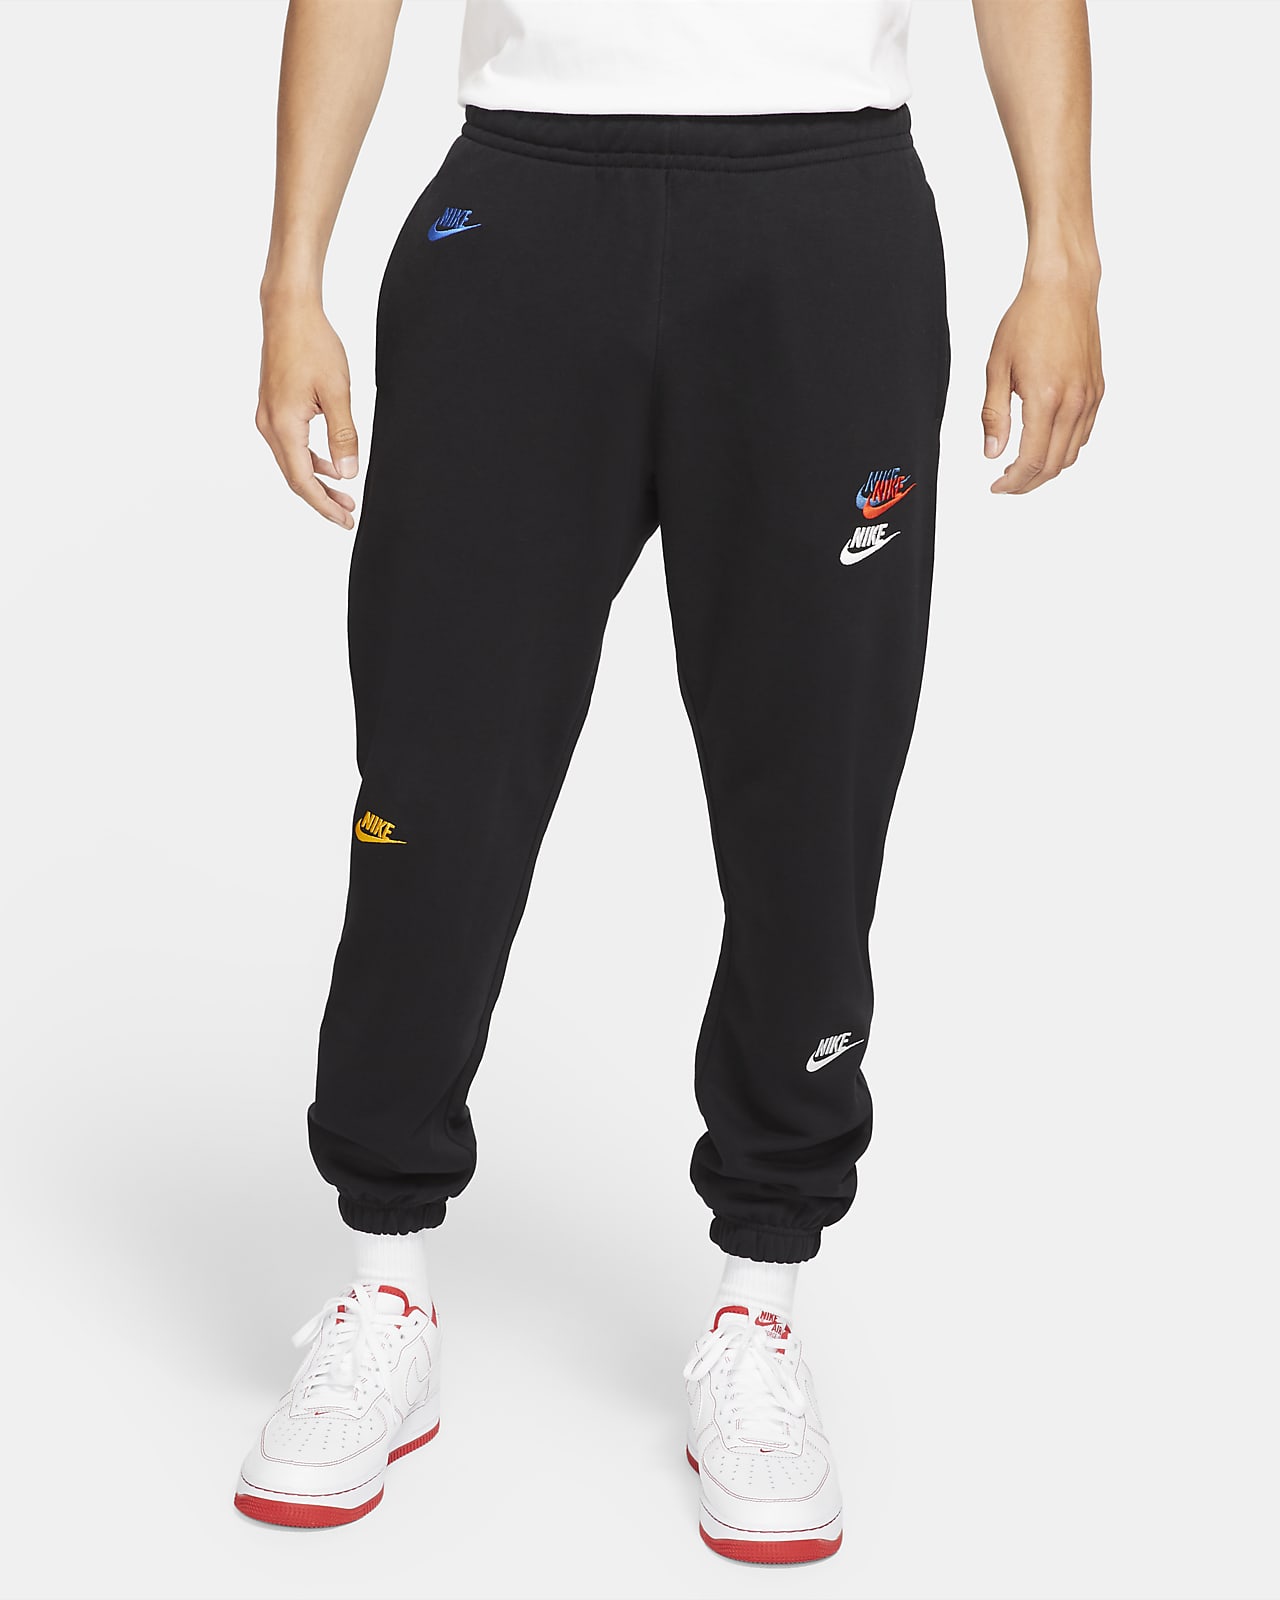 Nike Sportswear Essentials+ Men's French Terry Pants